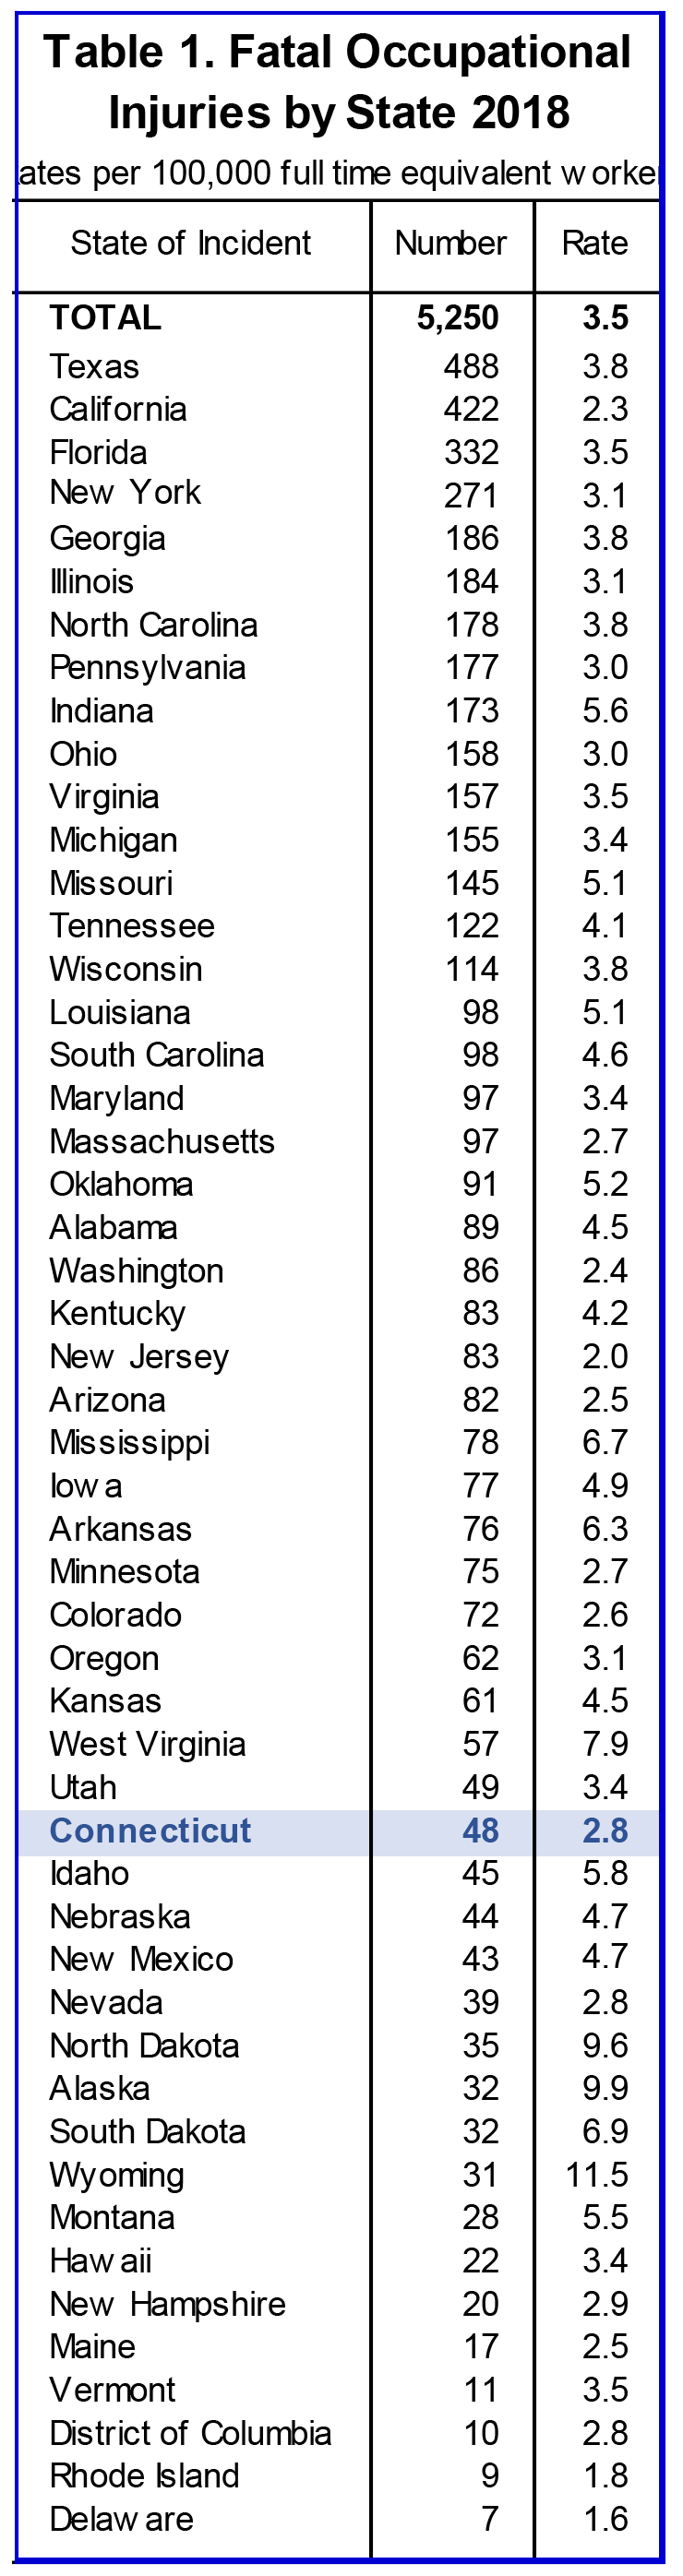 Table 1. Fatal Occupational Injuries by State 2018